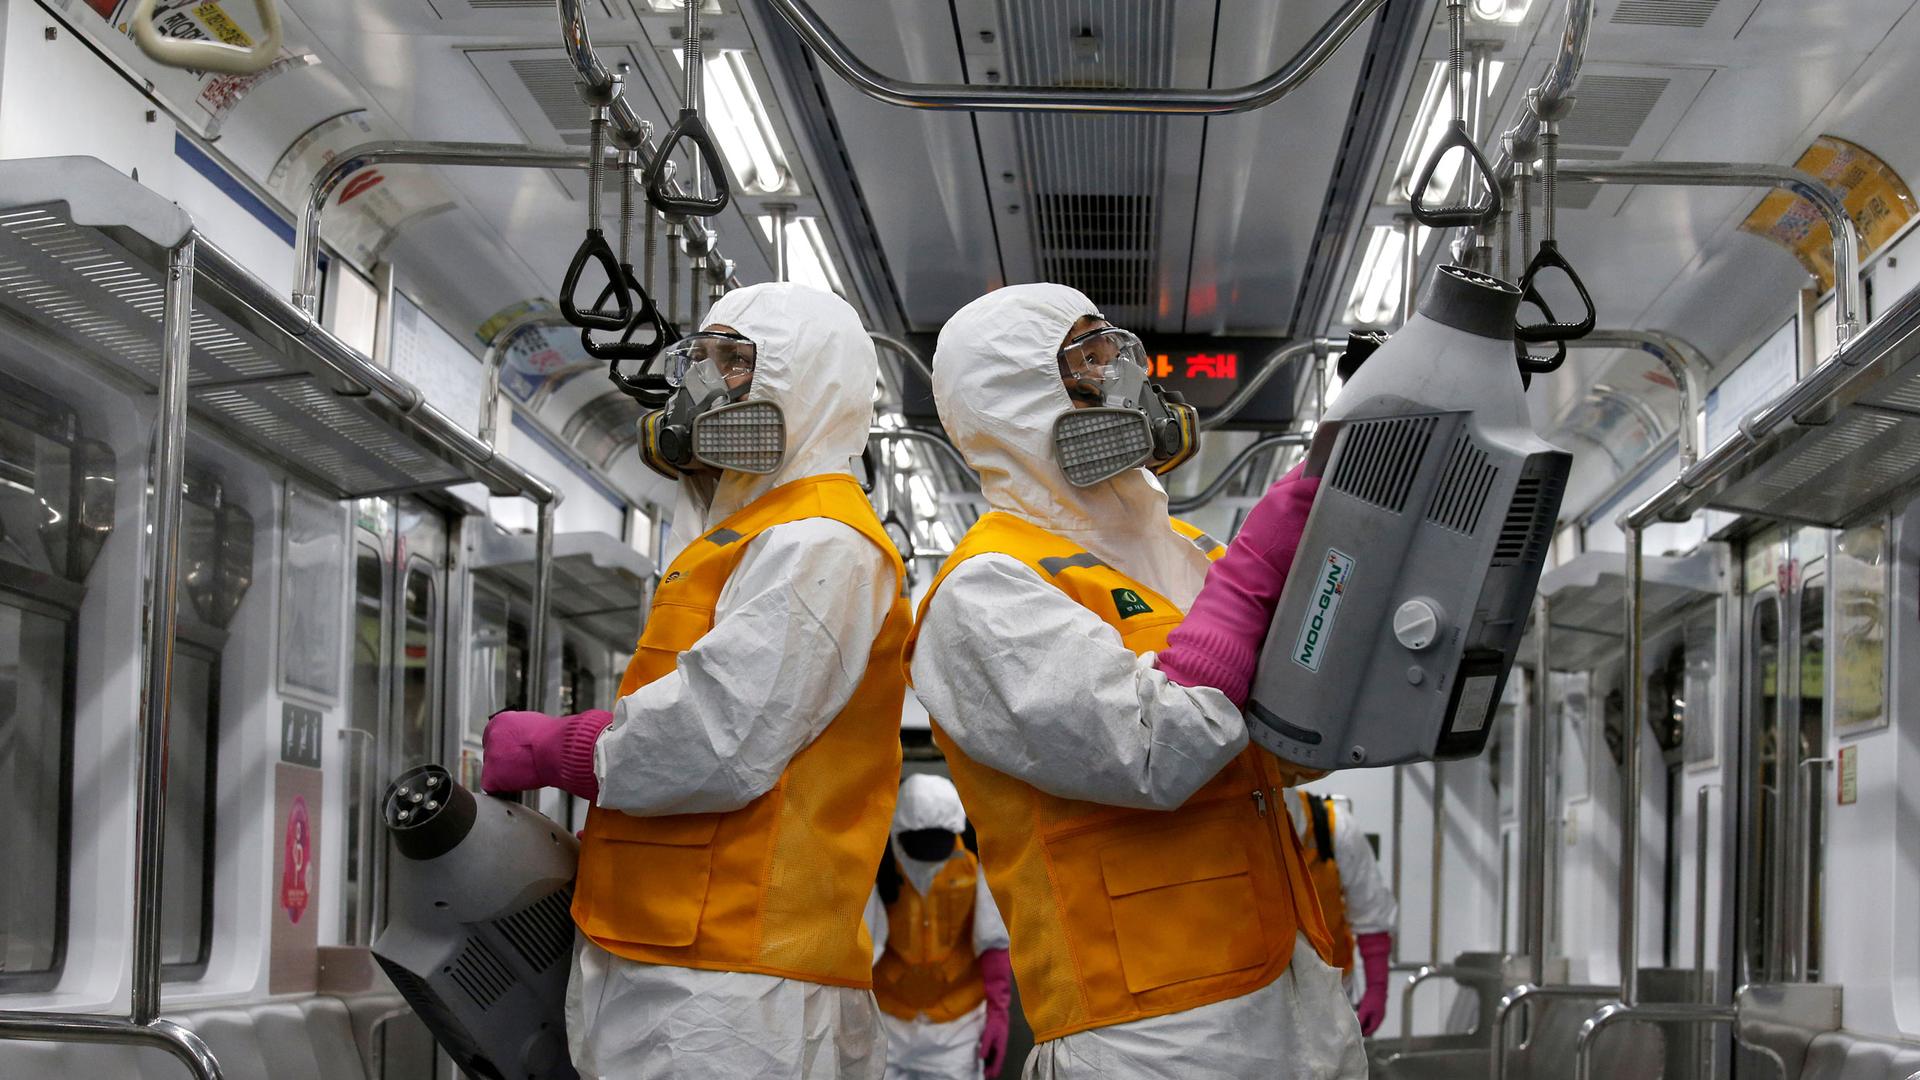 Two workers are shown inside a subway car with white and orange protective and carrying machines that are cleaning the car.